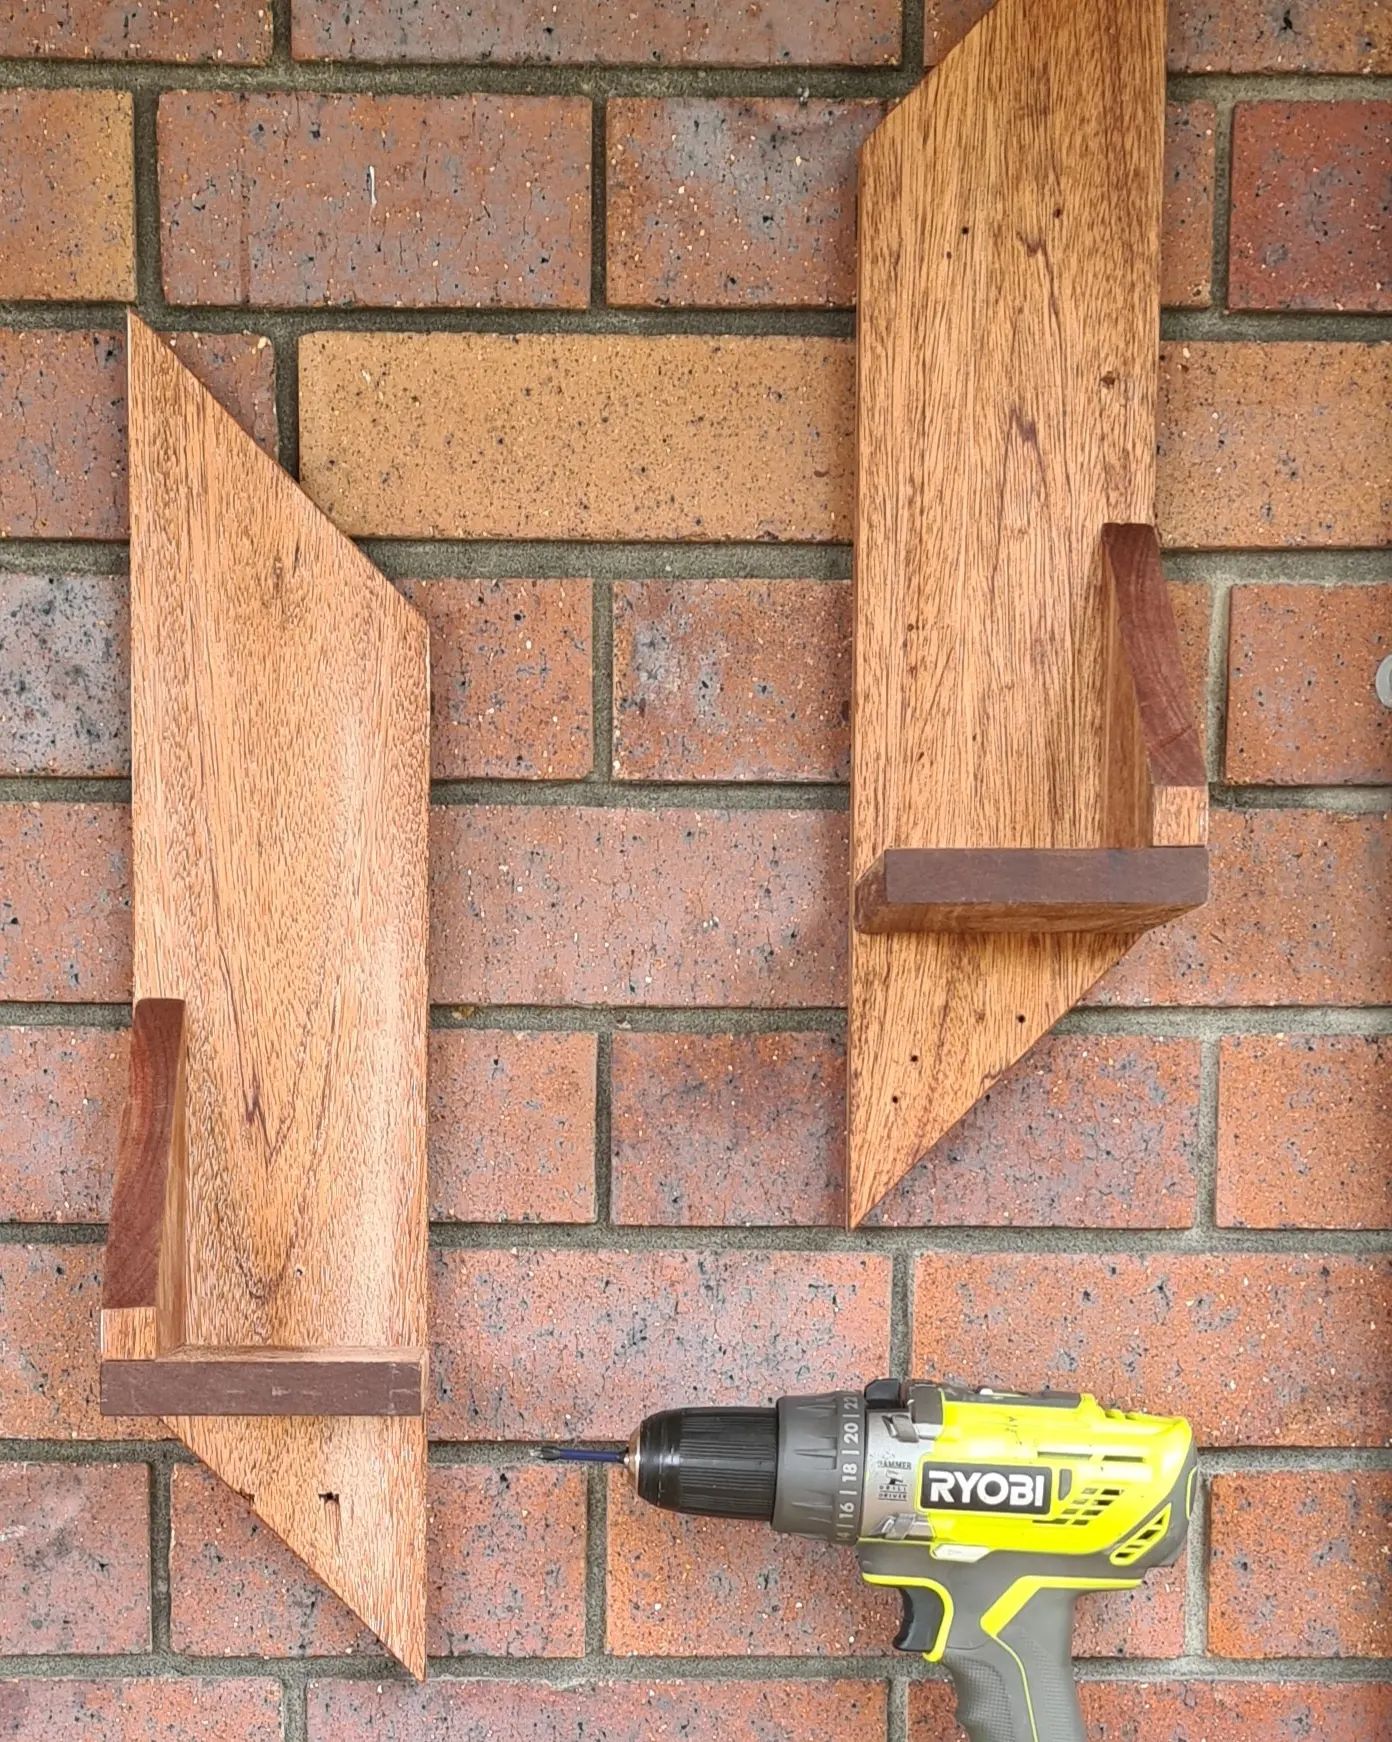 Cheeky long weekend project last weekend. Had all the ryobiau crew out for a couple of jobs #ryobimade